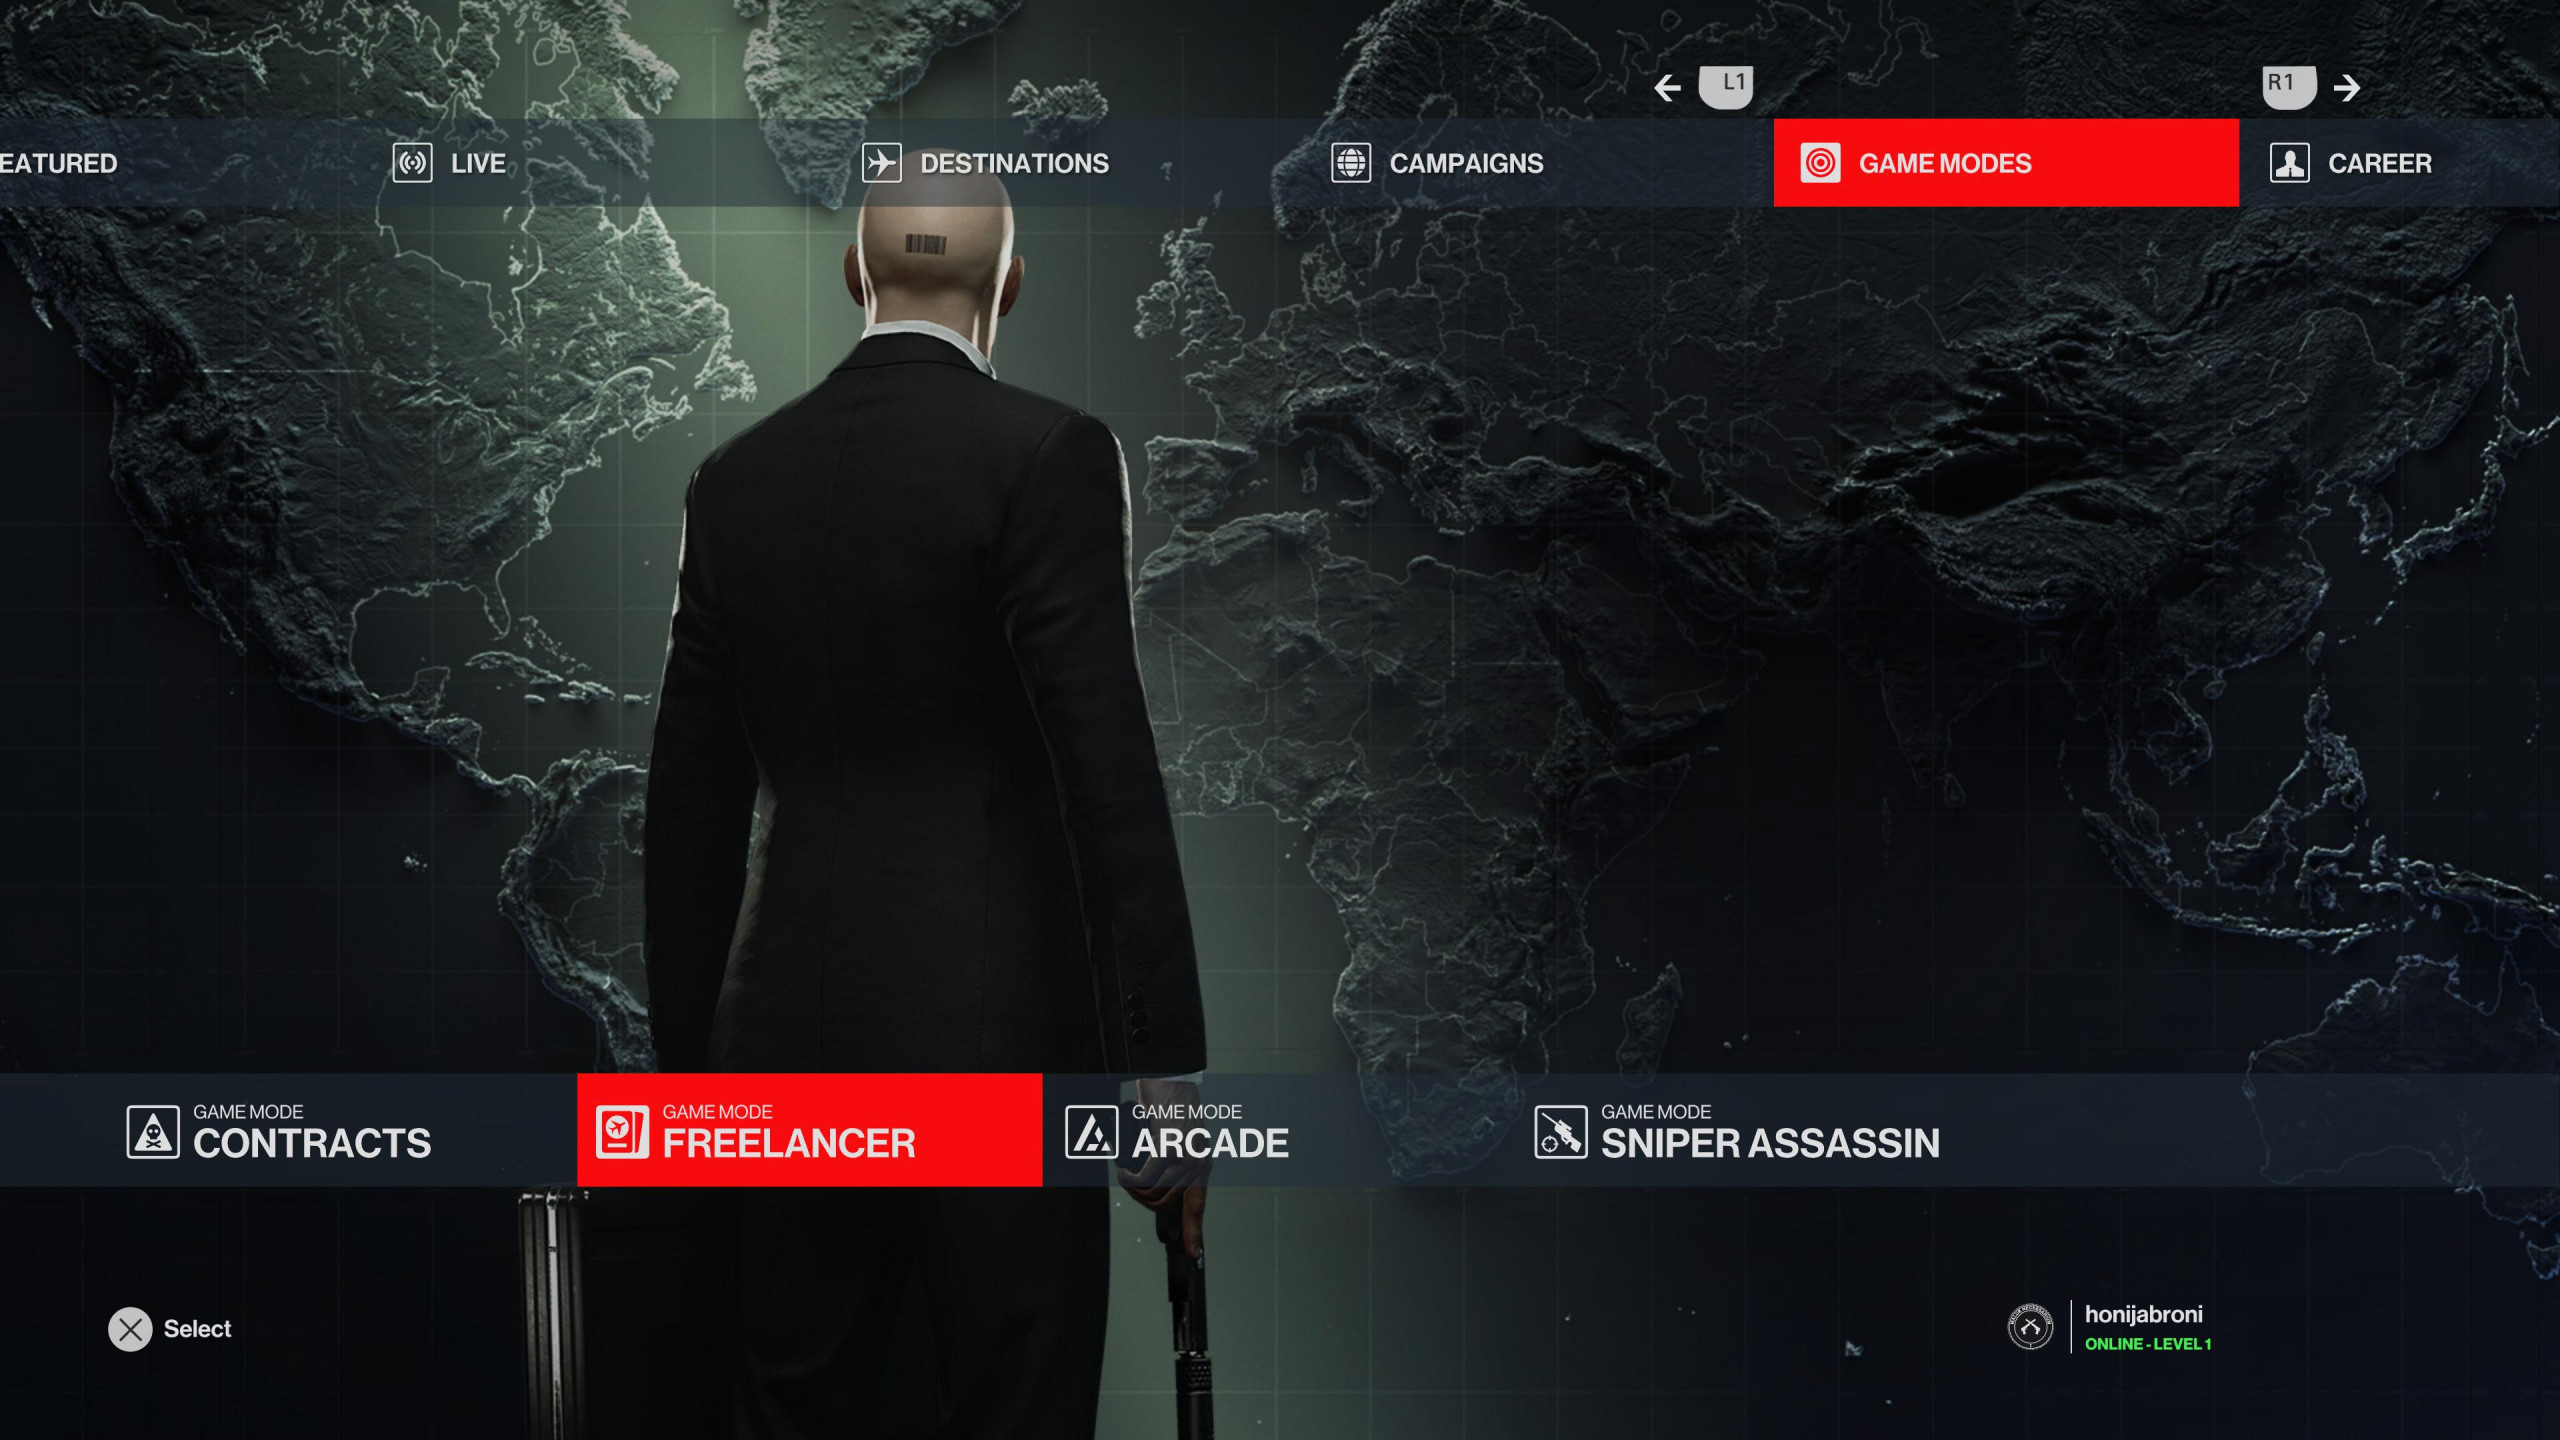 Mode select screen for Hitman World of Assassination showing the new Hitman Freelancer mode. Agenet 47 stands with his back to the camera. Hes dressed in his iconic black suit and white shirt. Hes holding his silenced pistol down by his right side.